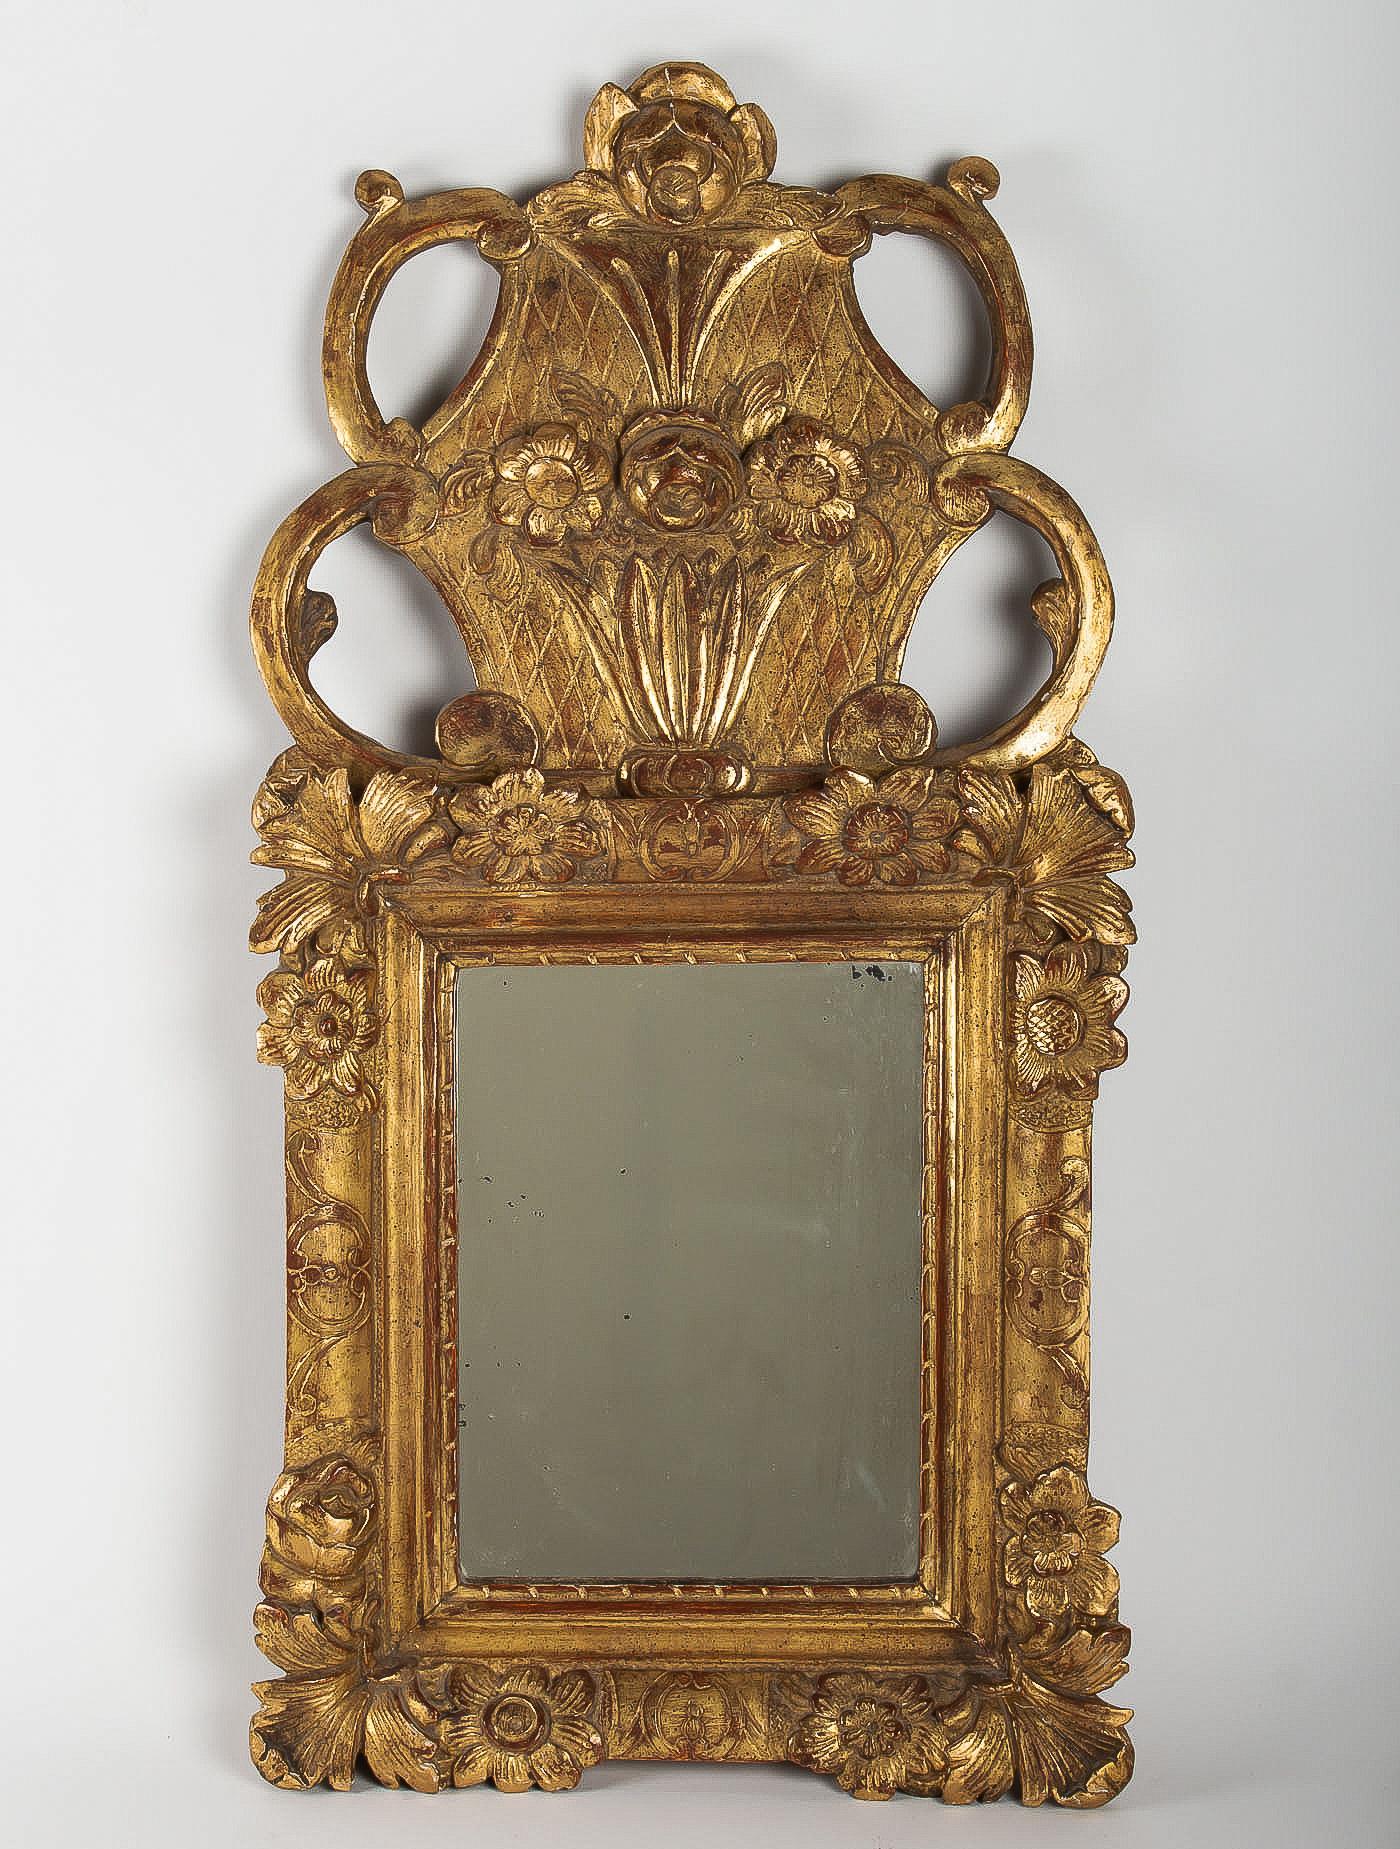 French Regence Provençal period, small giltwood top-front mirror, circa 1715-1723

An elegant and decorative, small carved giltwood top-front mirror, decorated with flowers décoration.

Lovely Provençal Regence period mirror, circa